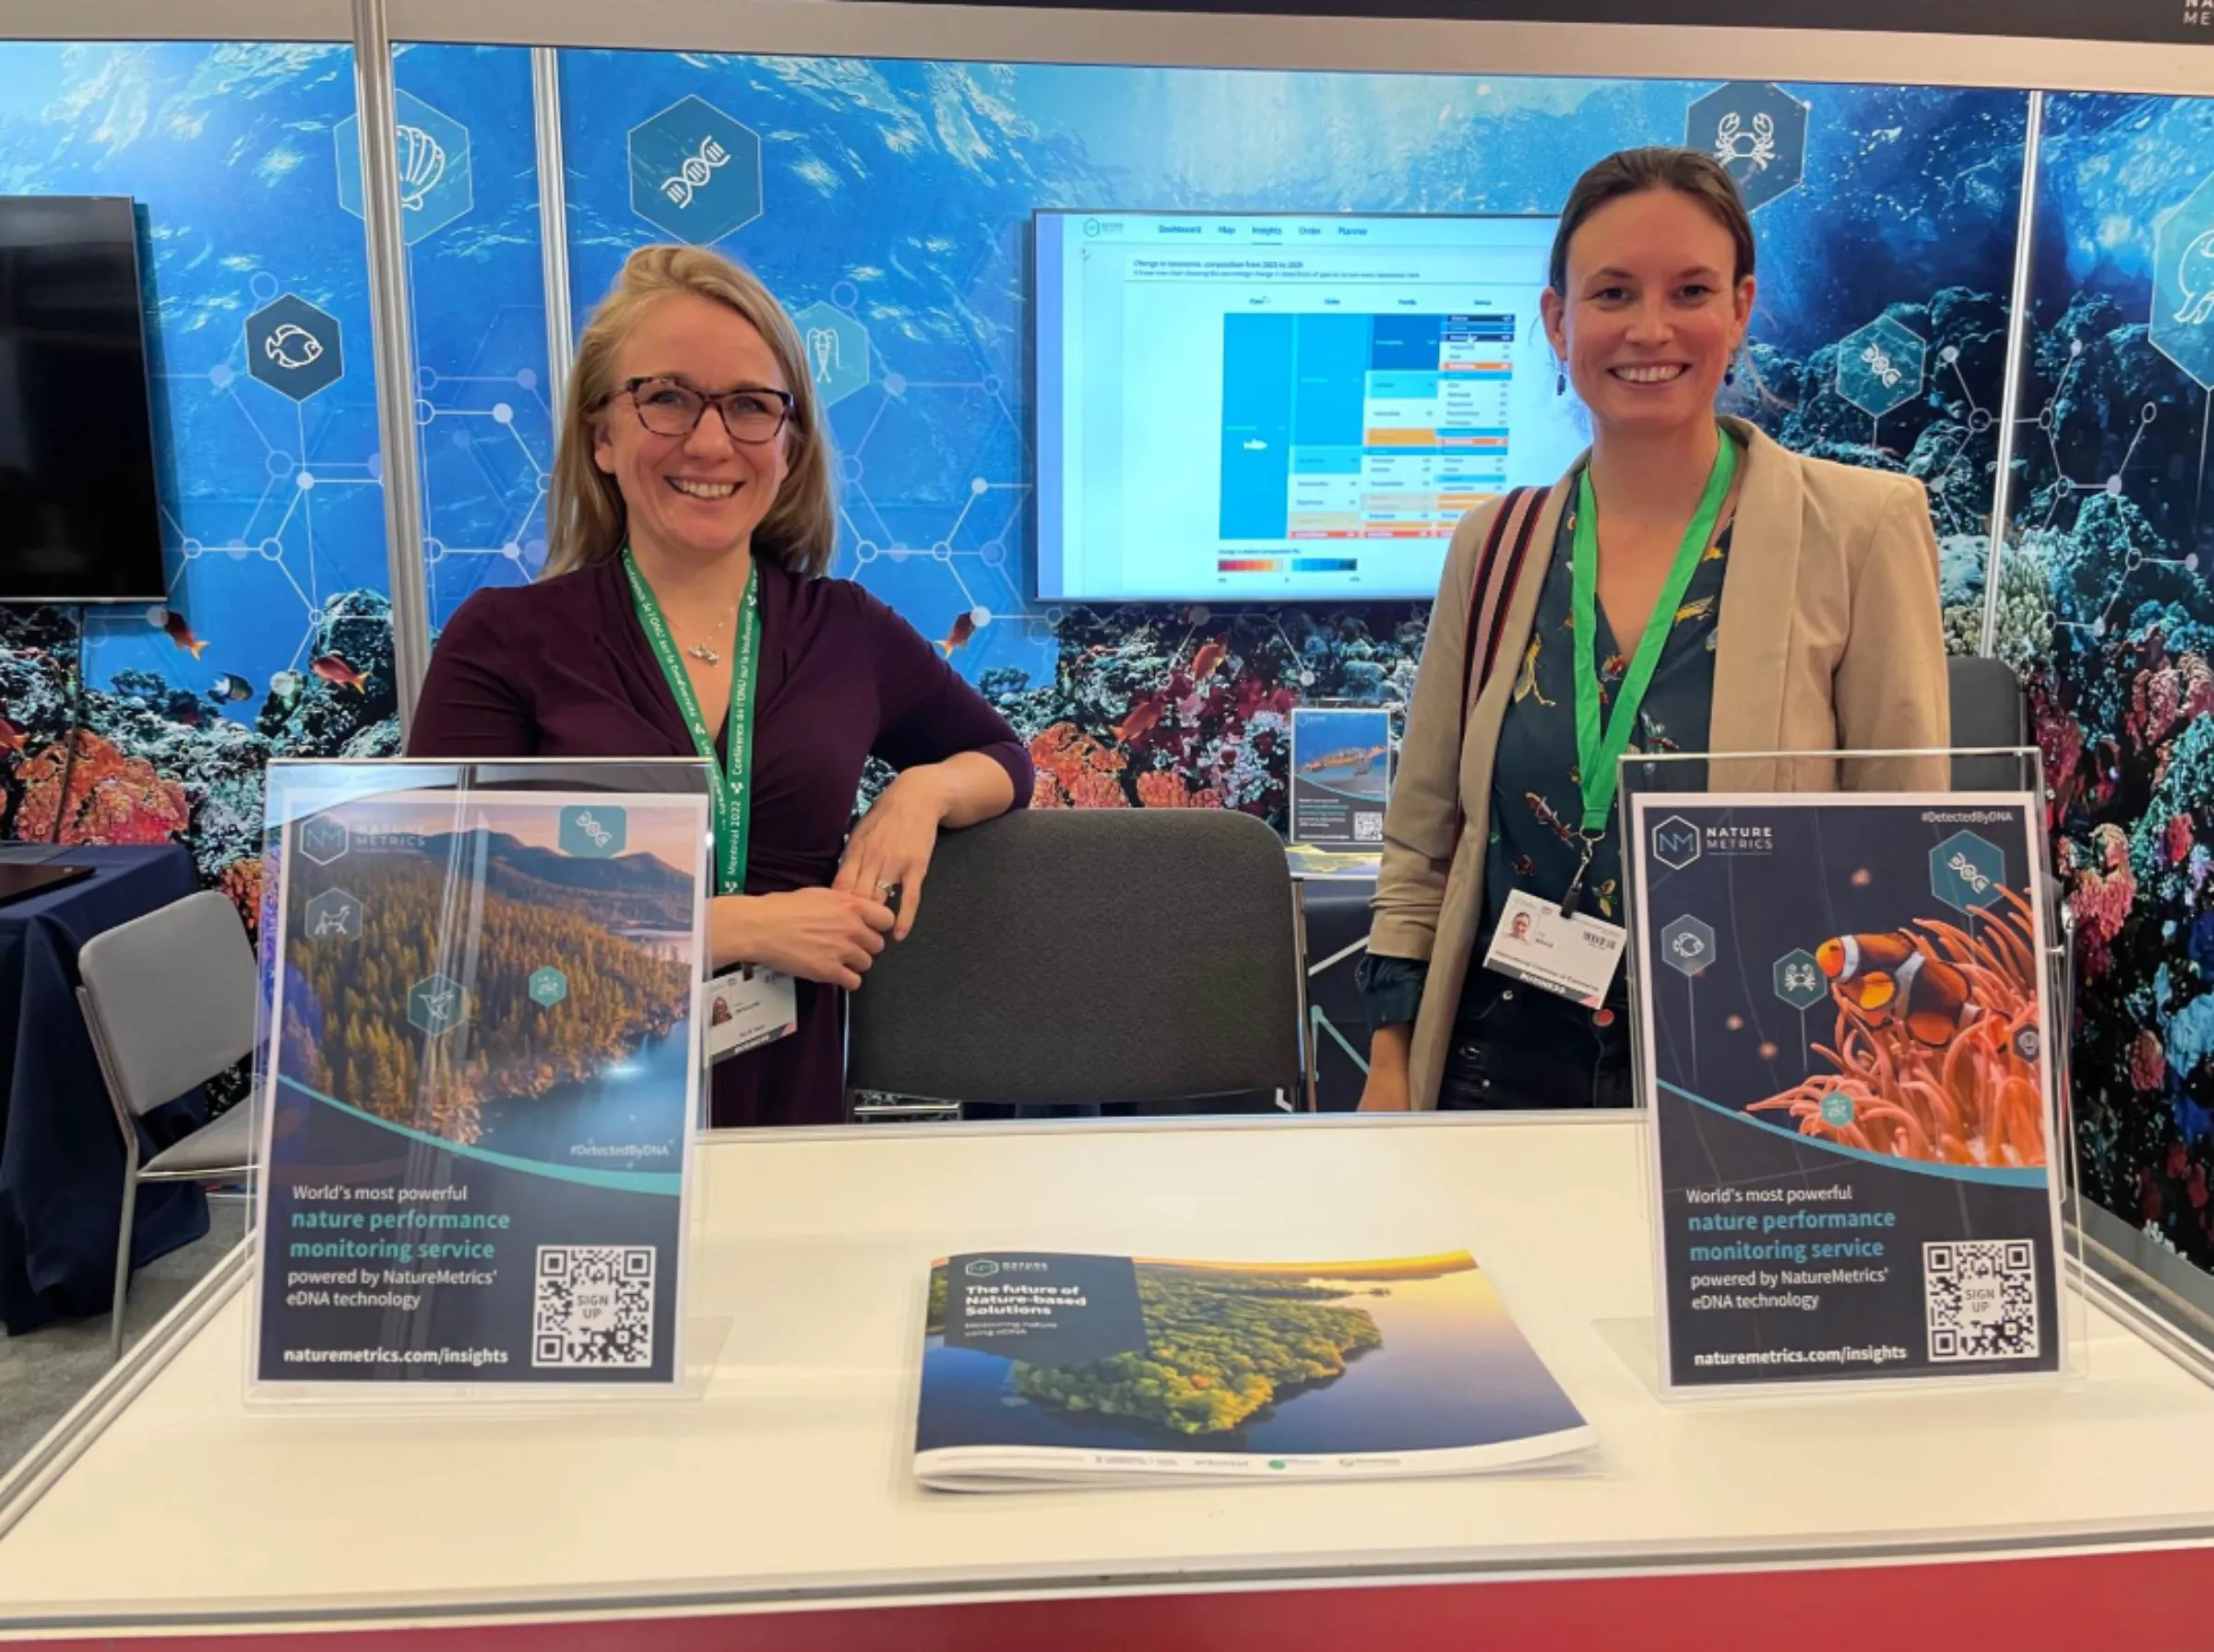 NatureMetrics CEO Katie Critchlow and founder Kat Bruce at COP15 biodiversity talks in Montreal, Canada, 8 December, 2022